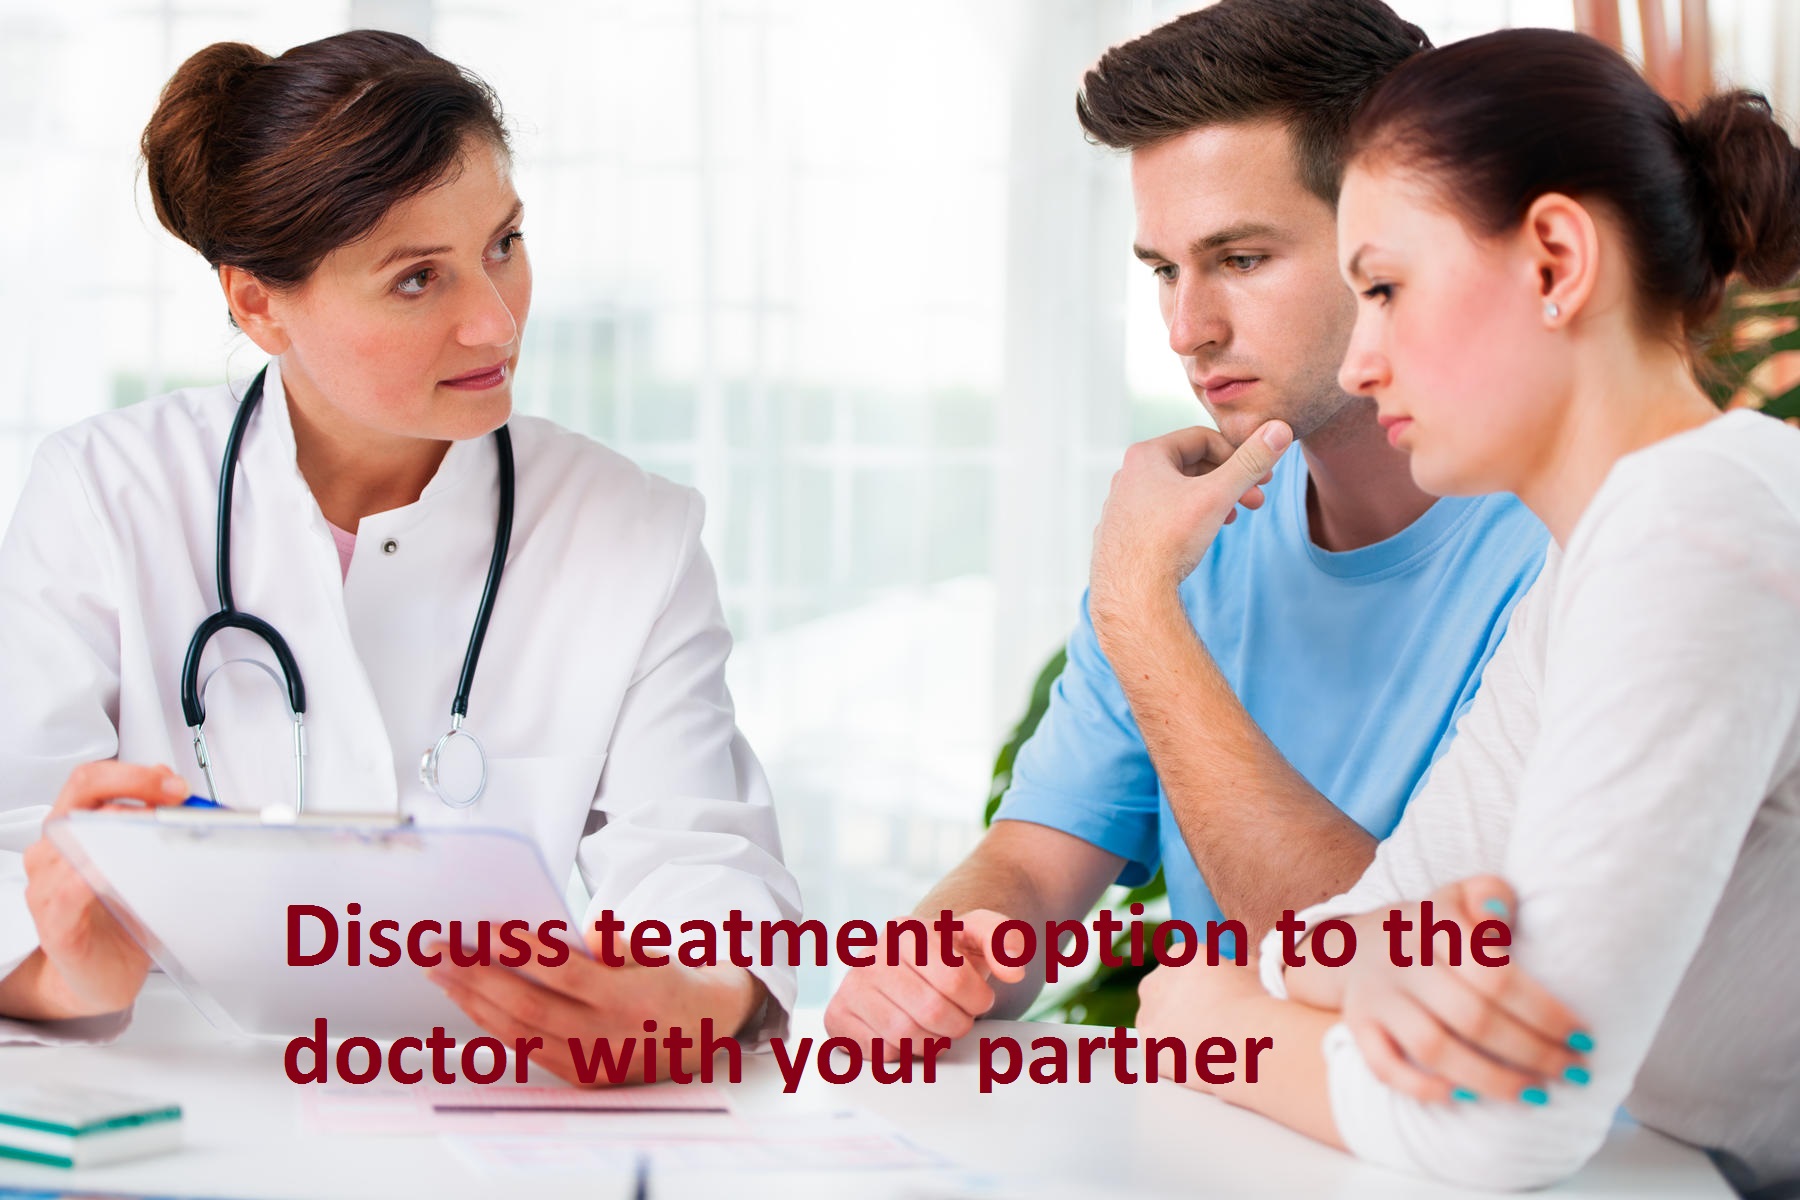 Discuss treatment options with your partner to the doctor